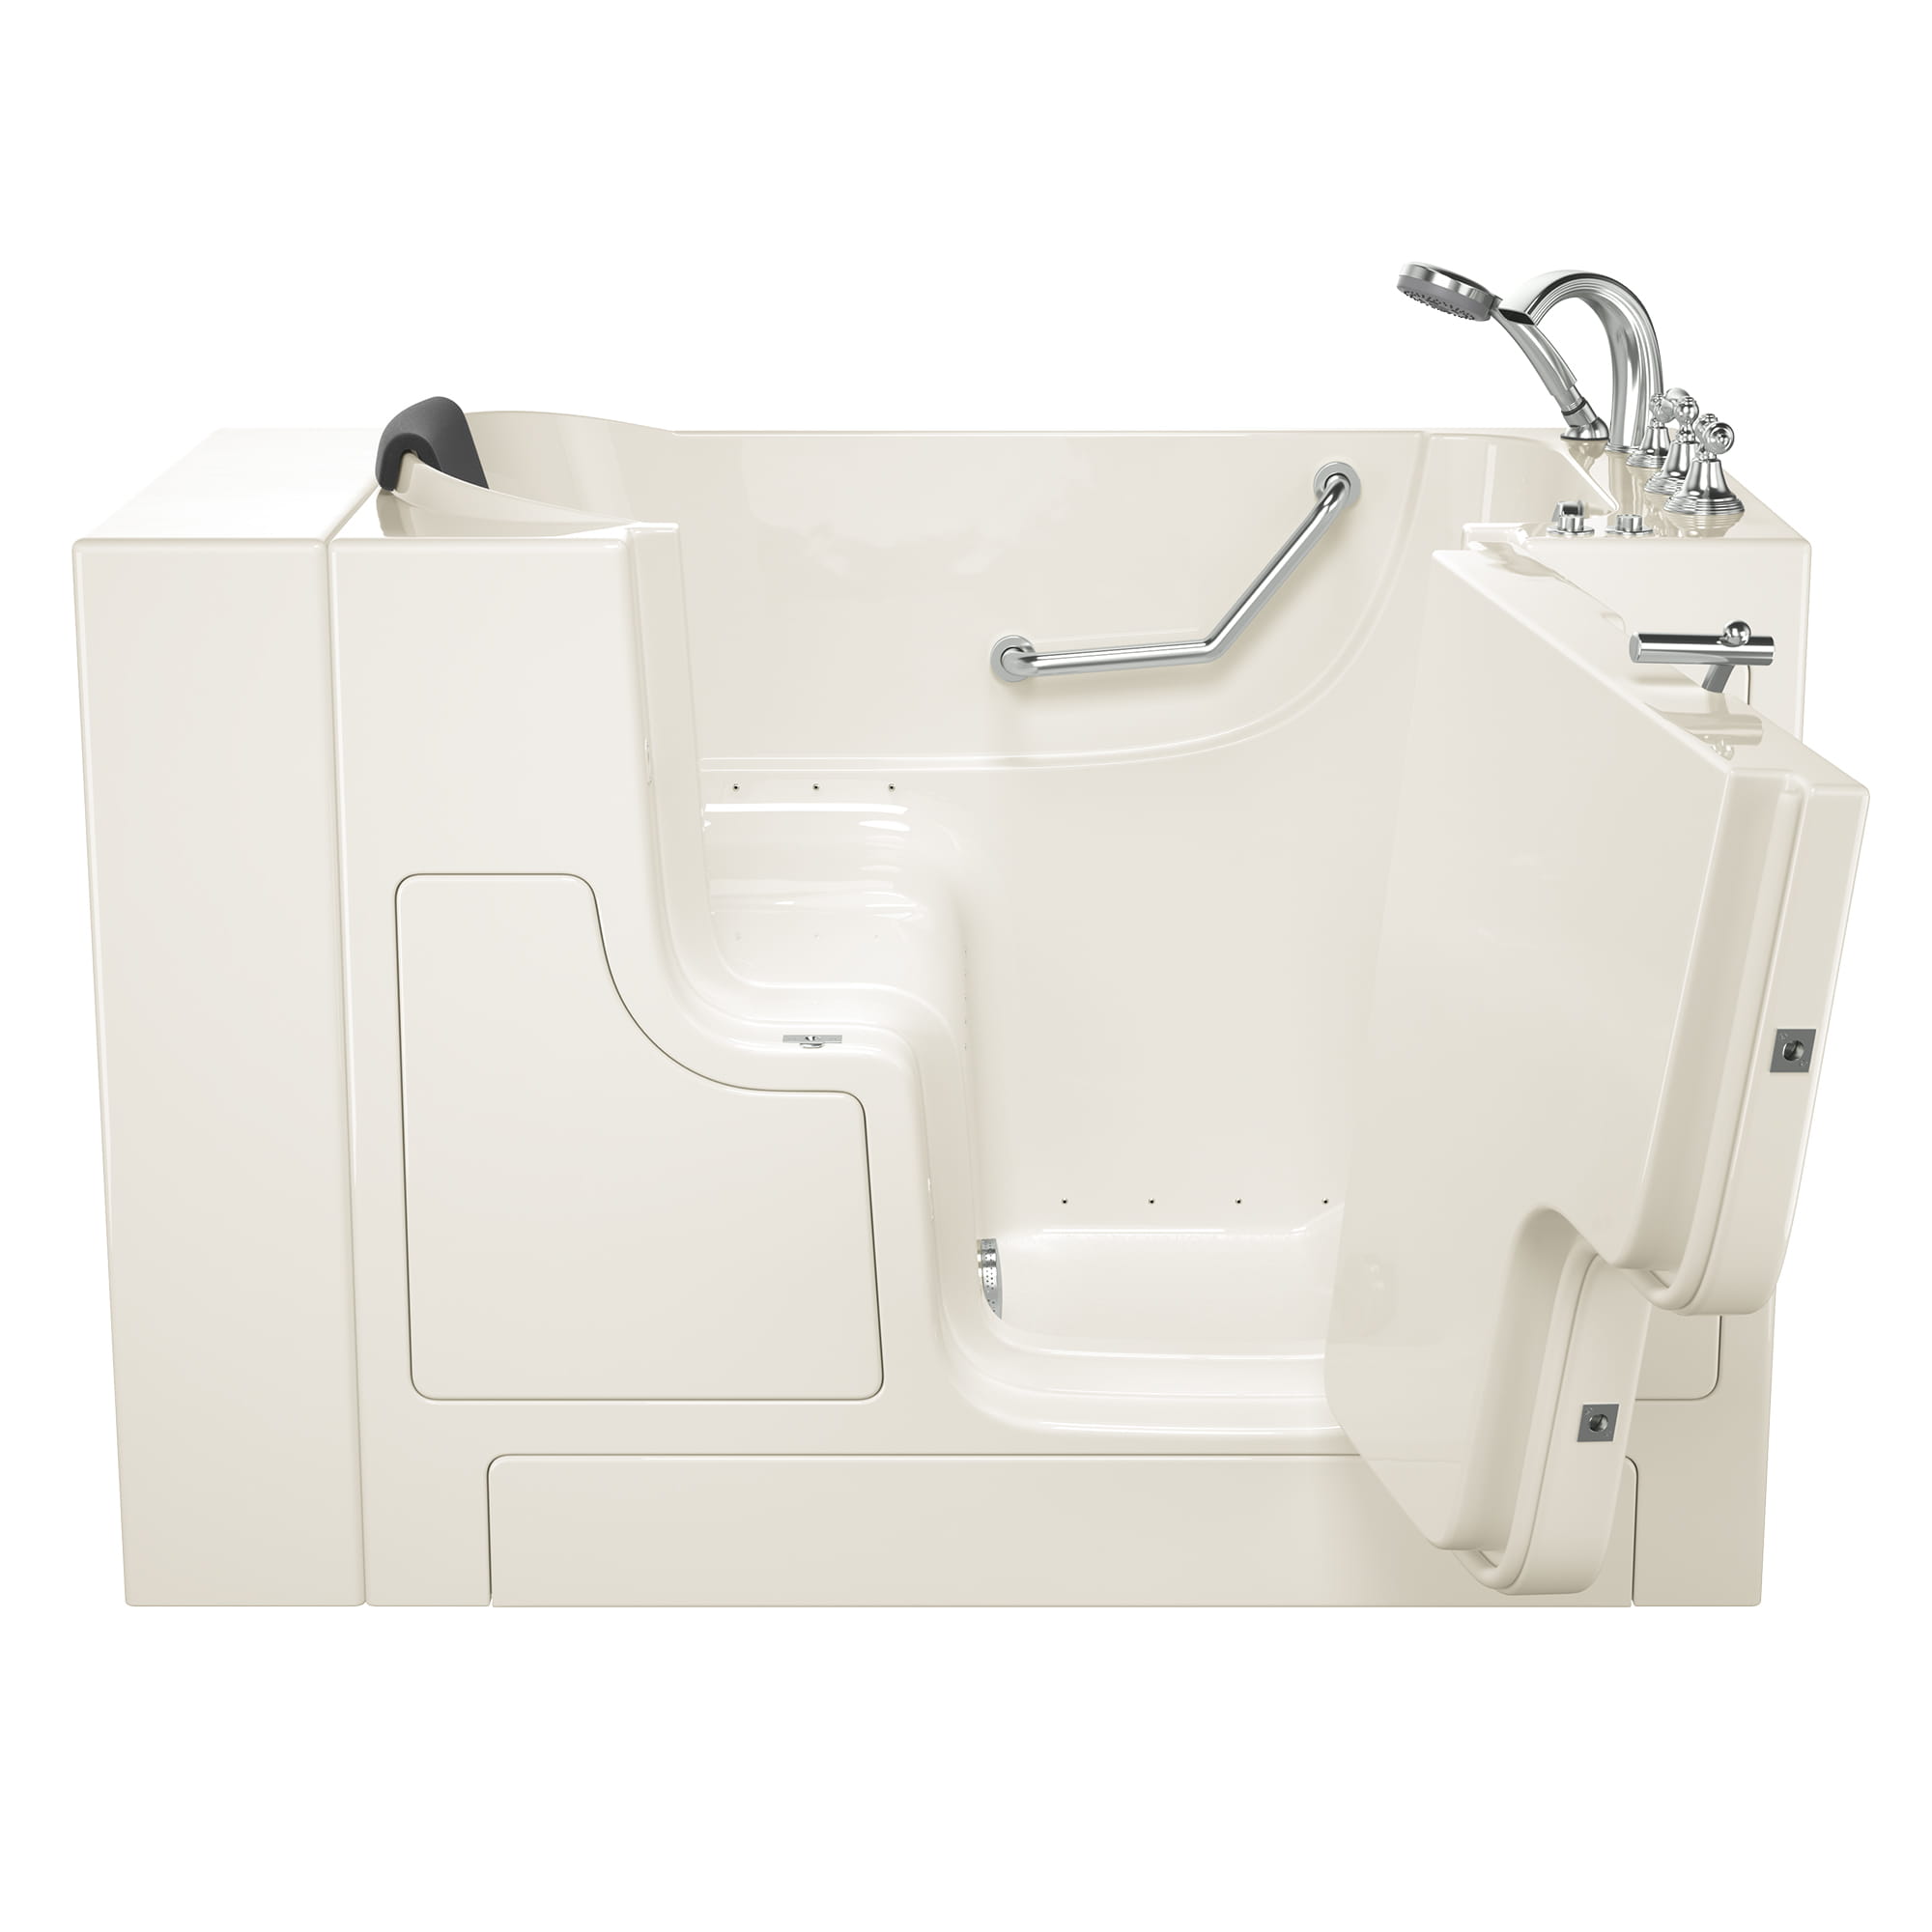 Gelcoat Premium Series 30 x 52  Inch Walk in Tub With Air Spa System   Right Hand Drain With Faucet WIB LINEN